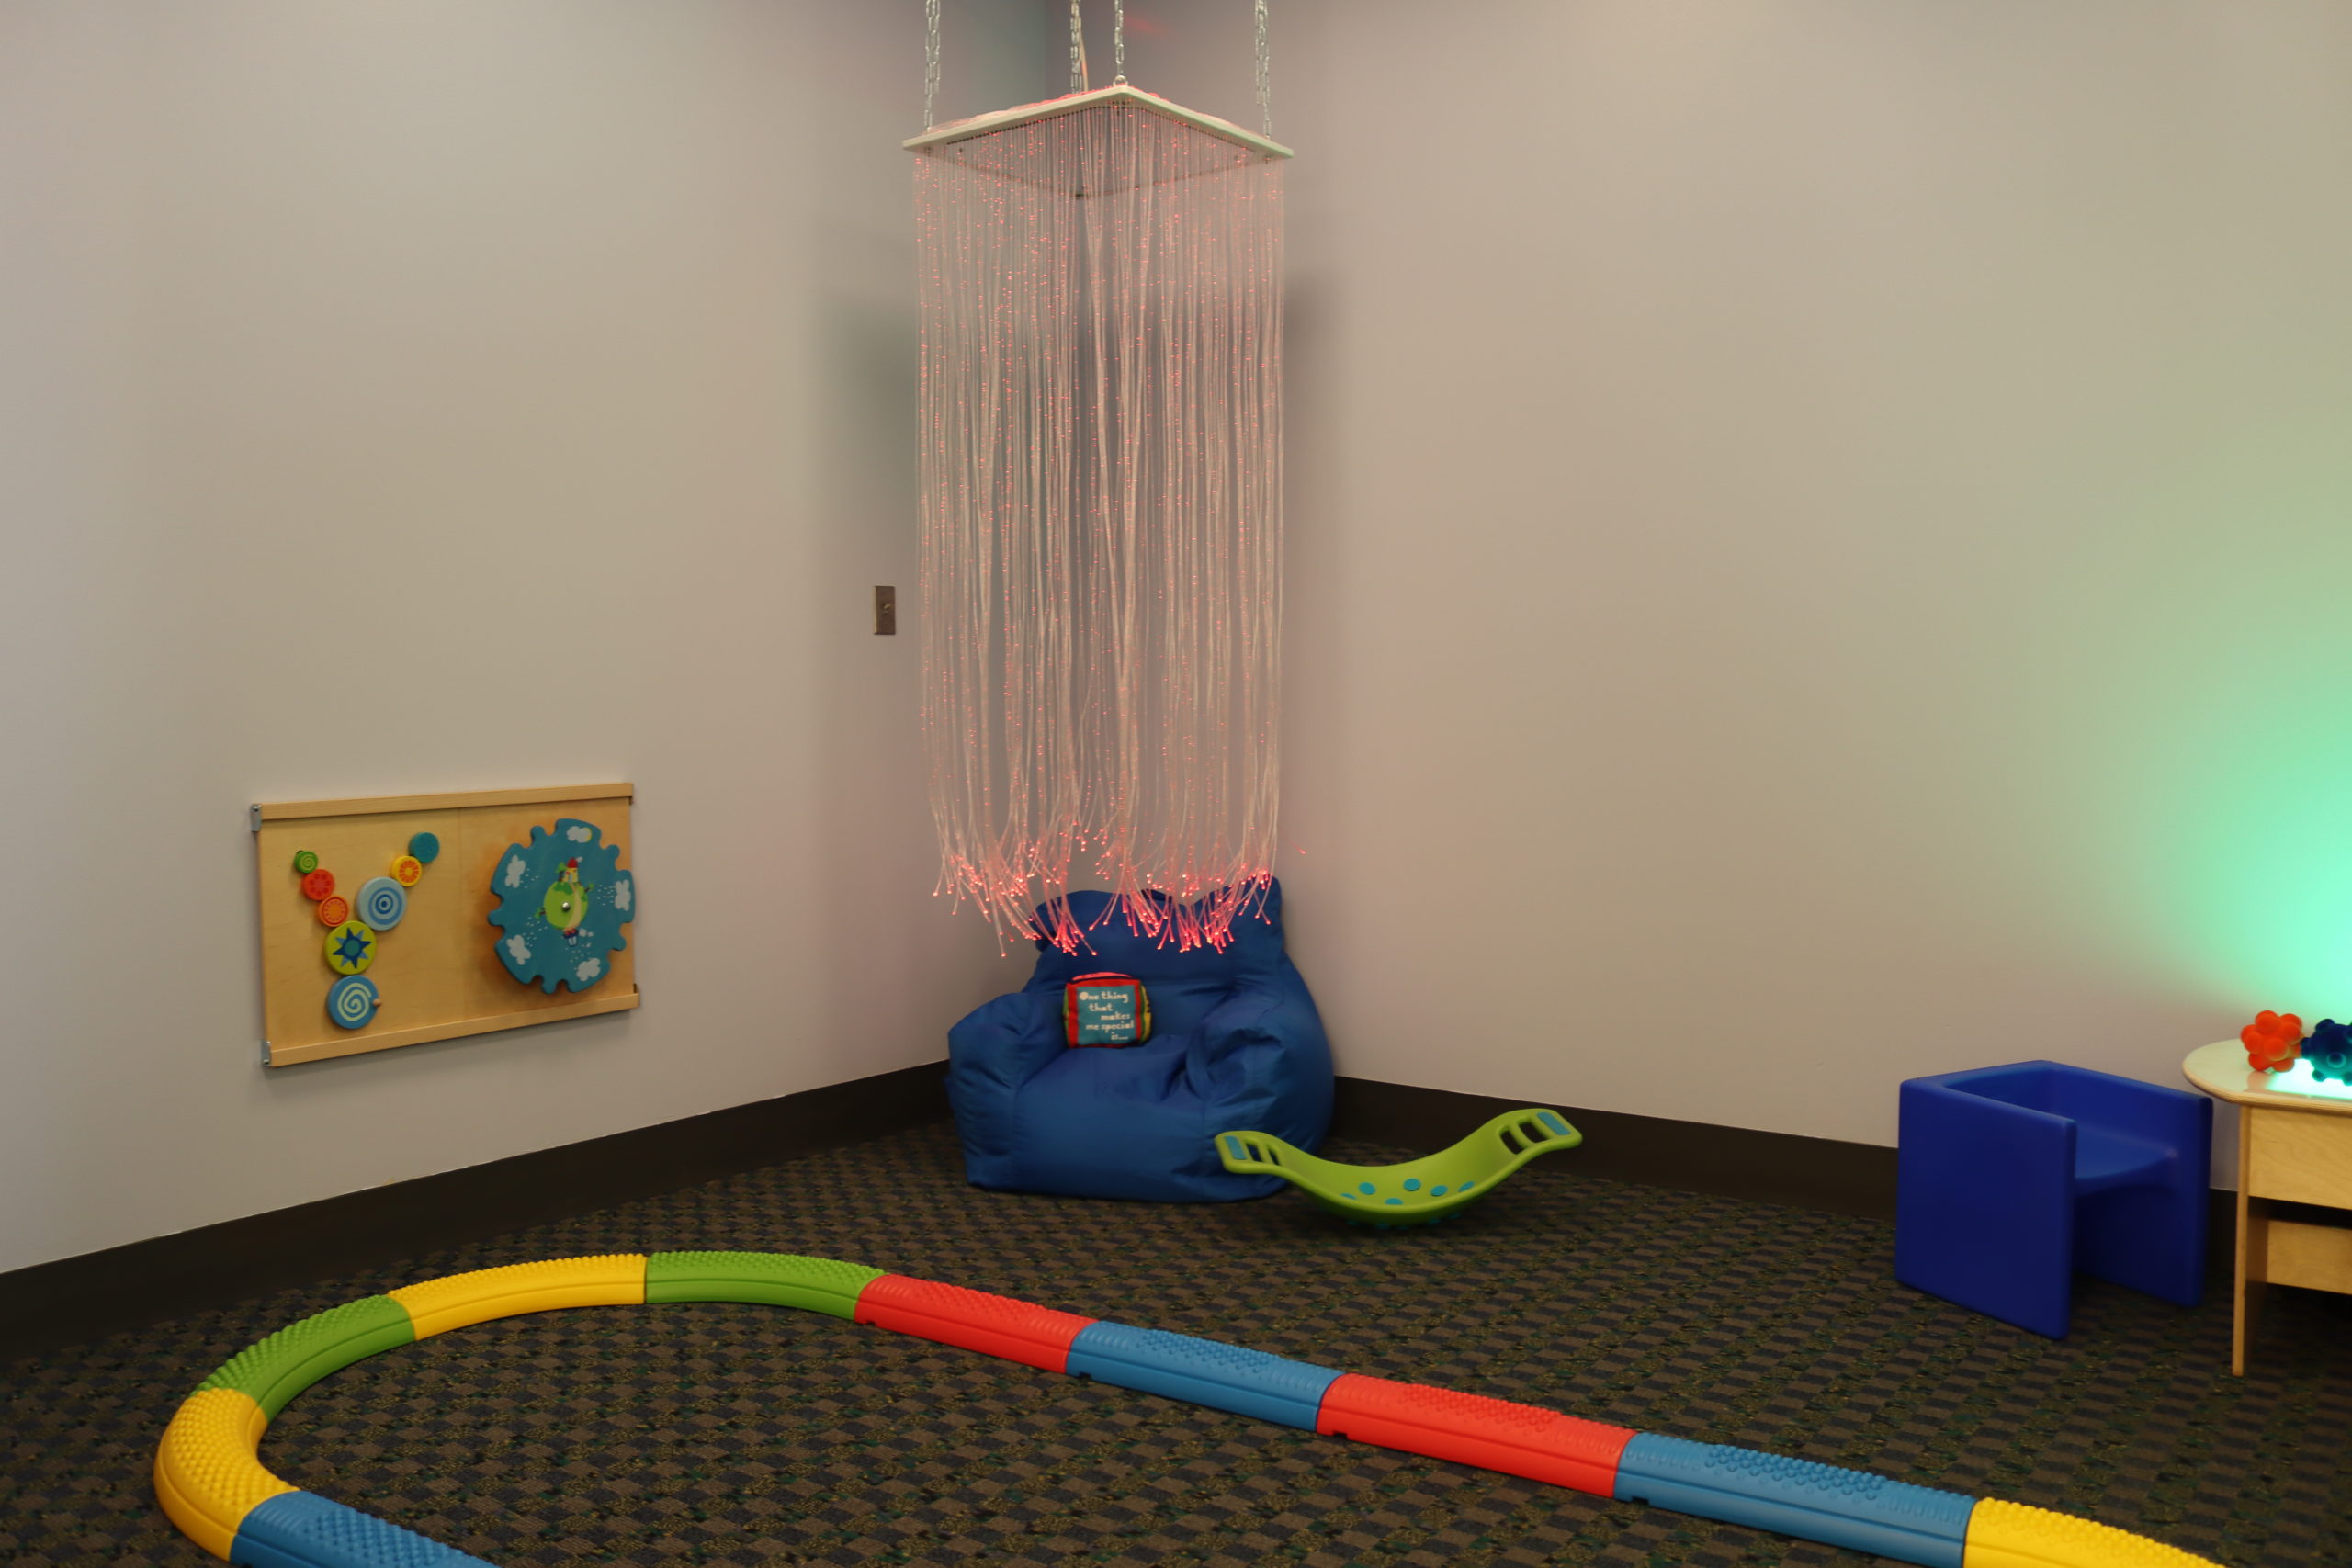 Synagogue preschool's sensory room provides pathway to learning